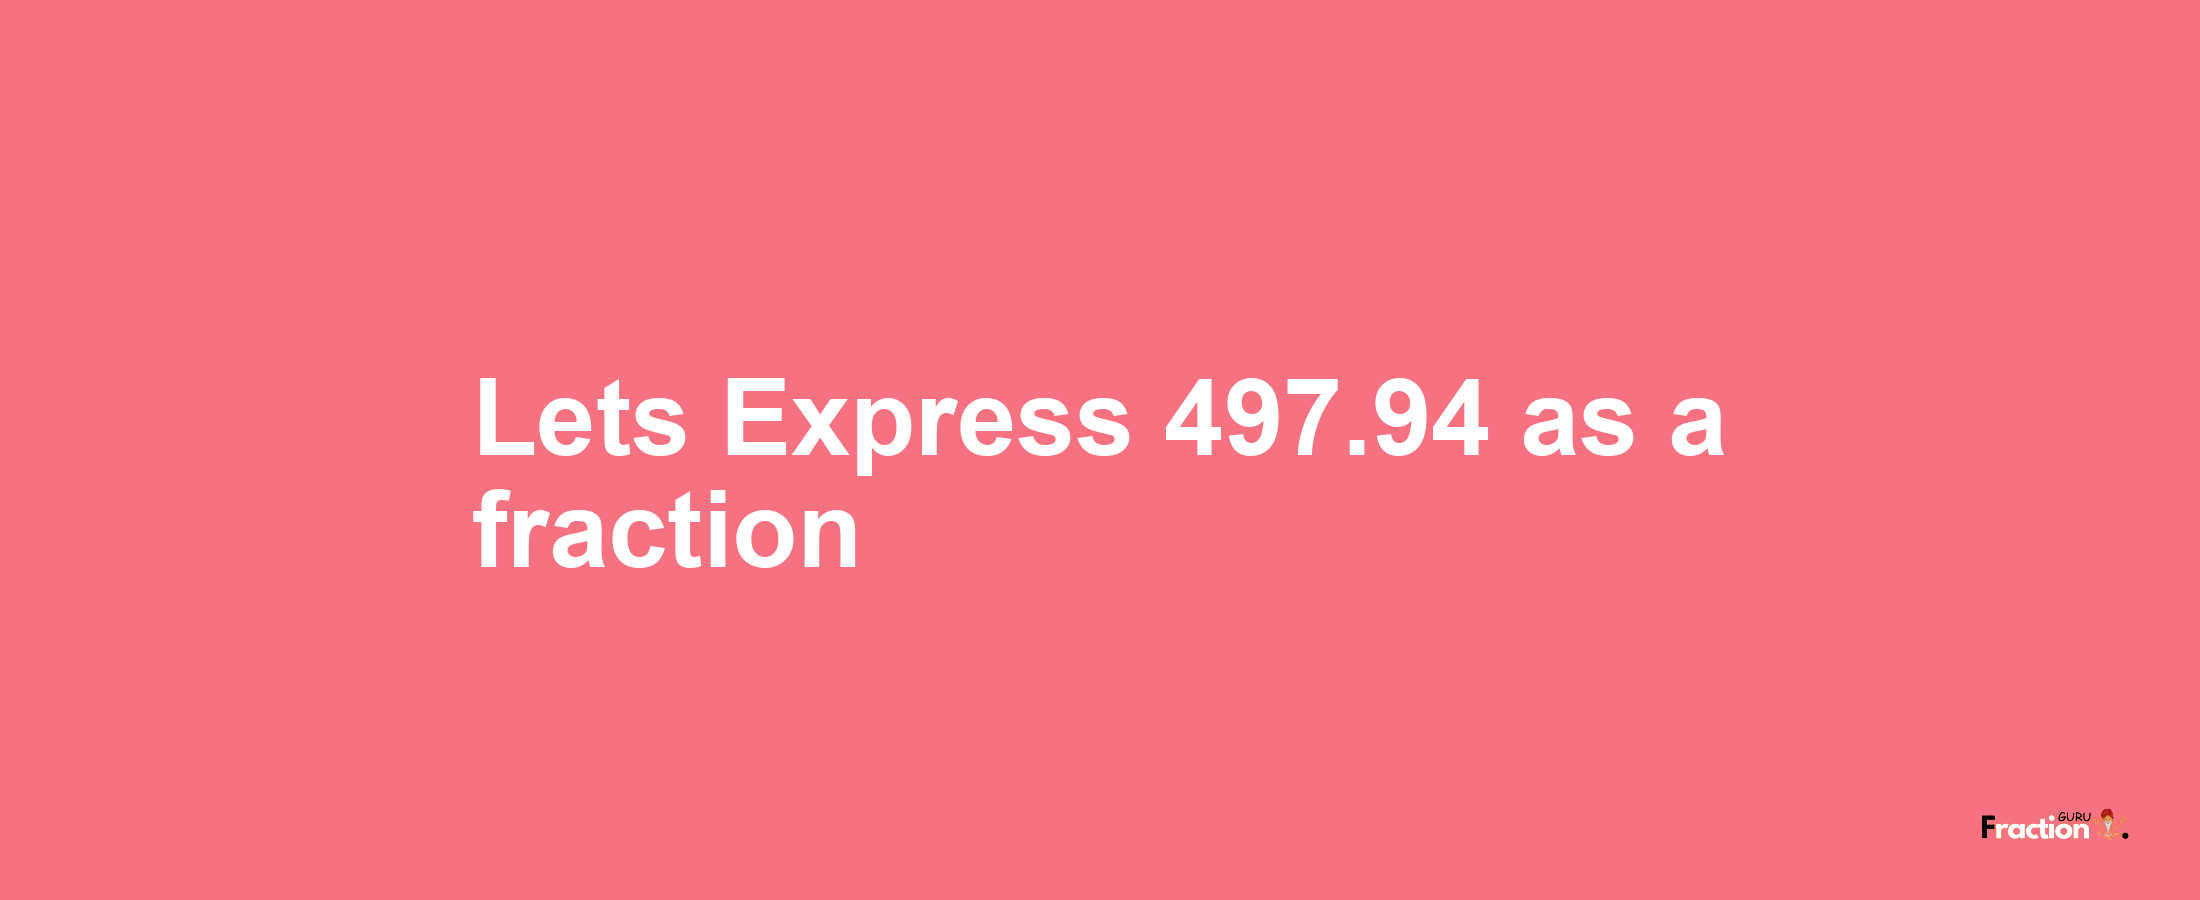 Lets Express 497.94 as afraction